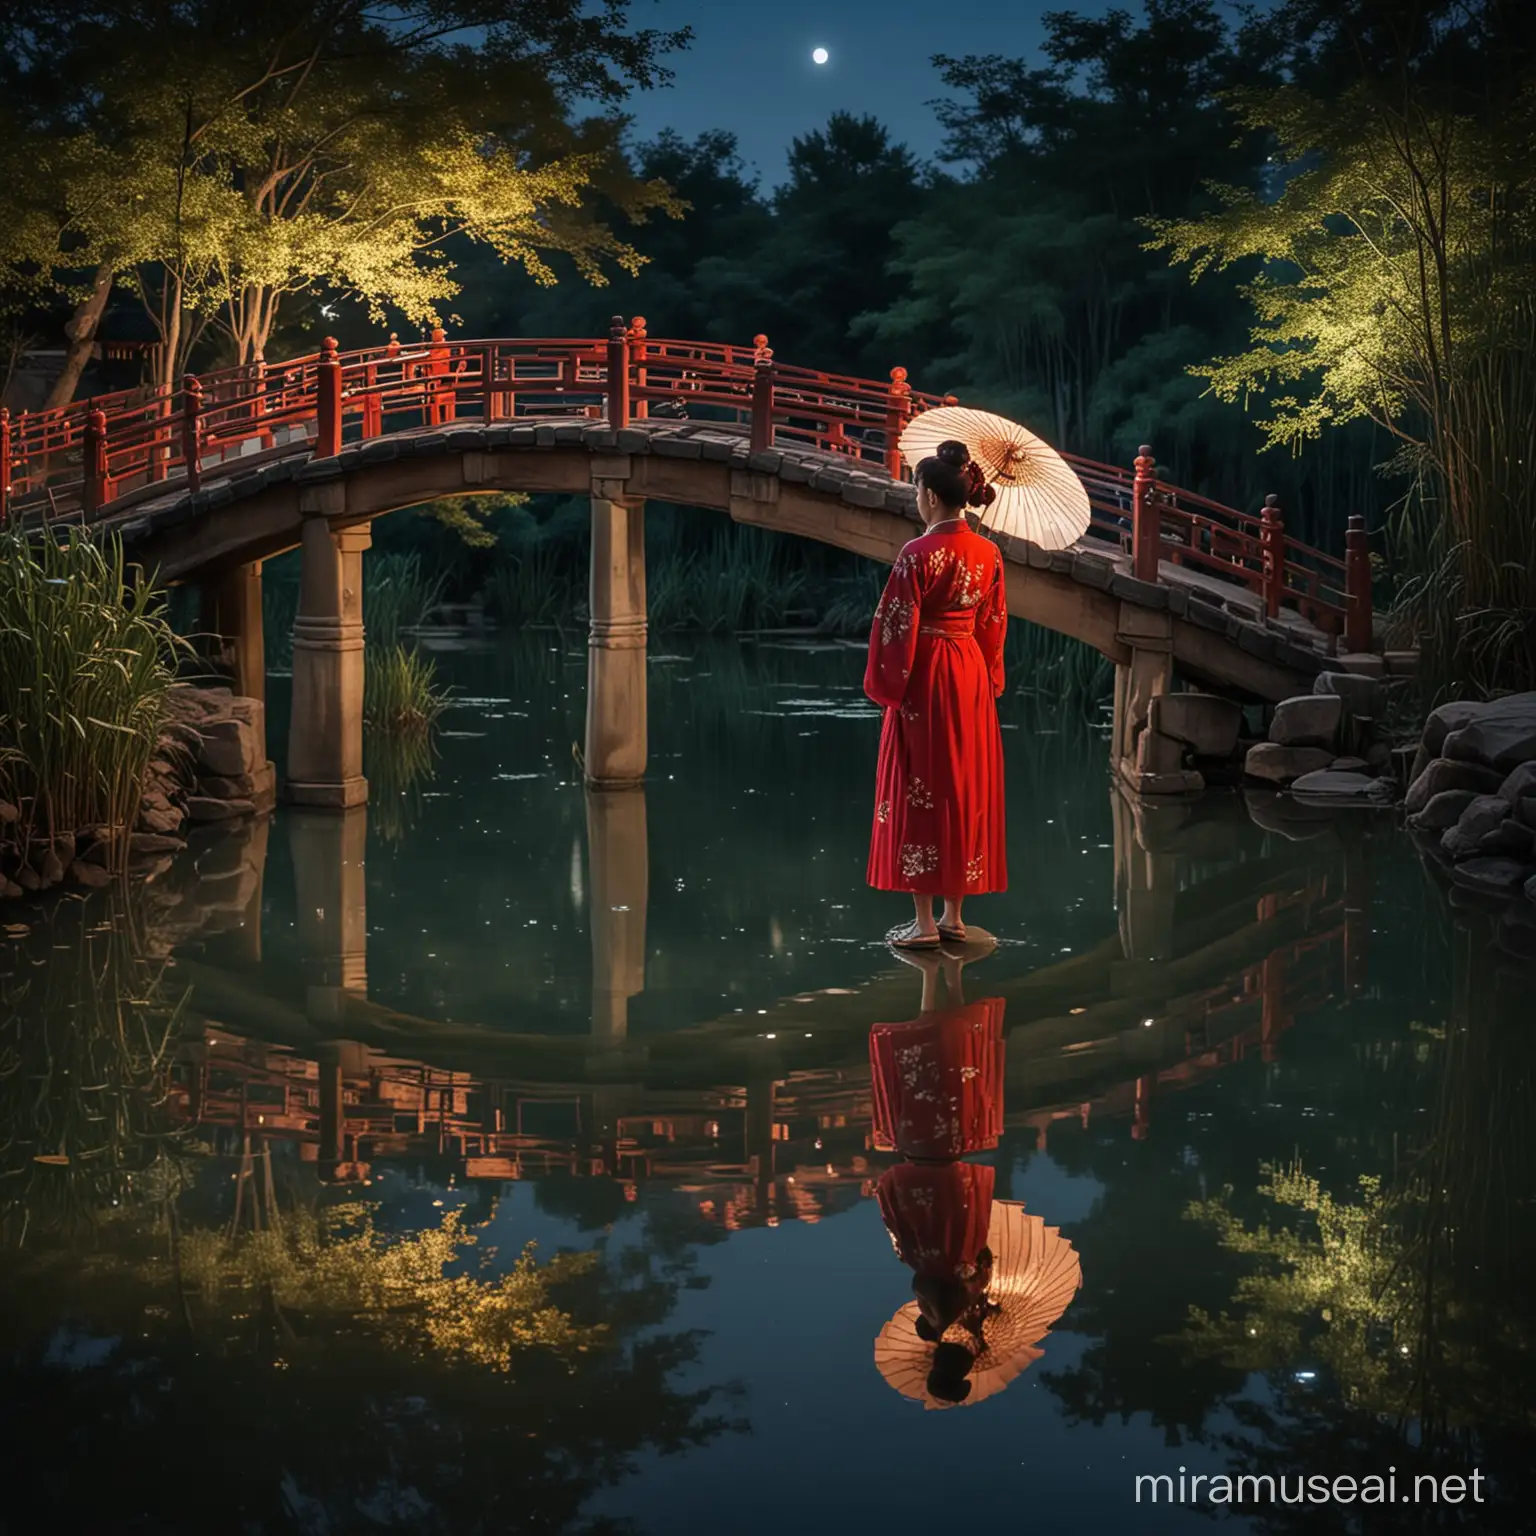 Moonlight is shining on the pond in the middle of the night.
The eyes of men and women are big and the color of their eyes is brown.
Men and women have distinct characteristics.
The man and woman are wearing Chinese style clothes. 
The color of the man's top and bottom is blue.
The color of a woman's top and bottom is red.
And the man and woman are wearing Chinese shoes.
There are bridges and pavilions near the pond.
There's no one around.
The two are on the bridge.
It's a romantic atmosphere.